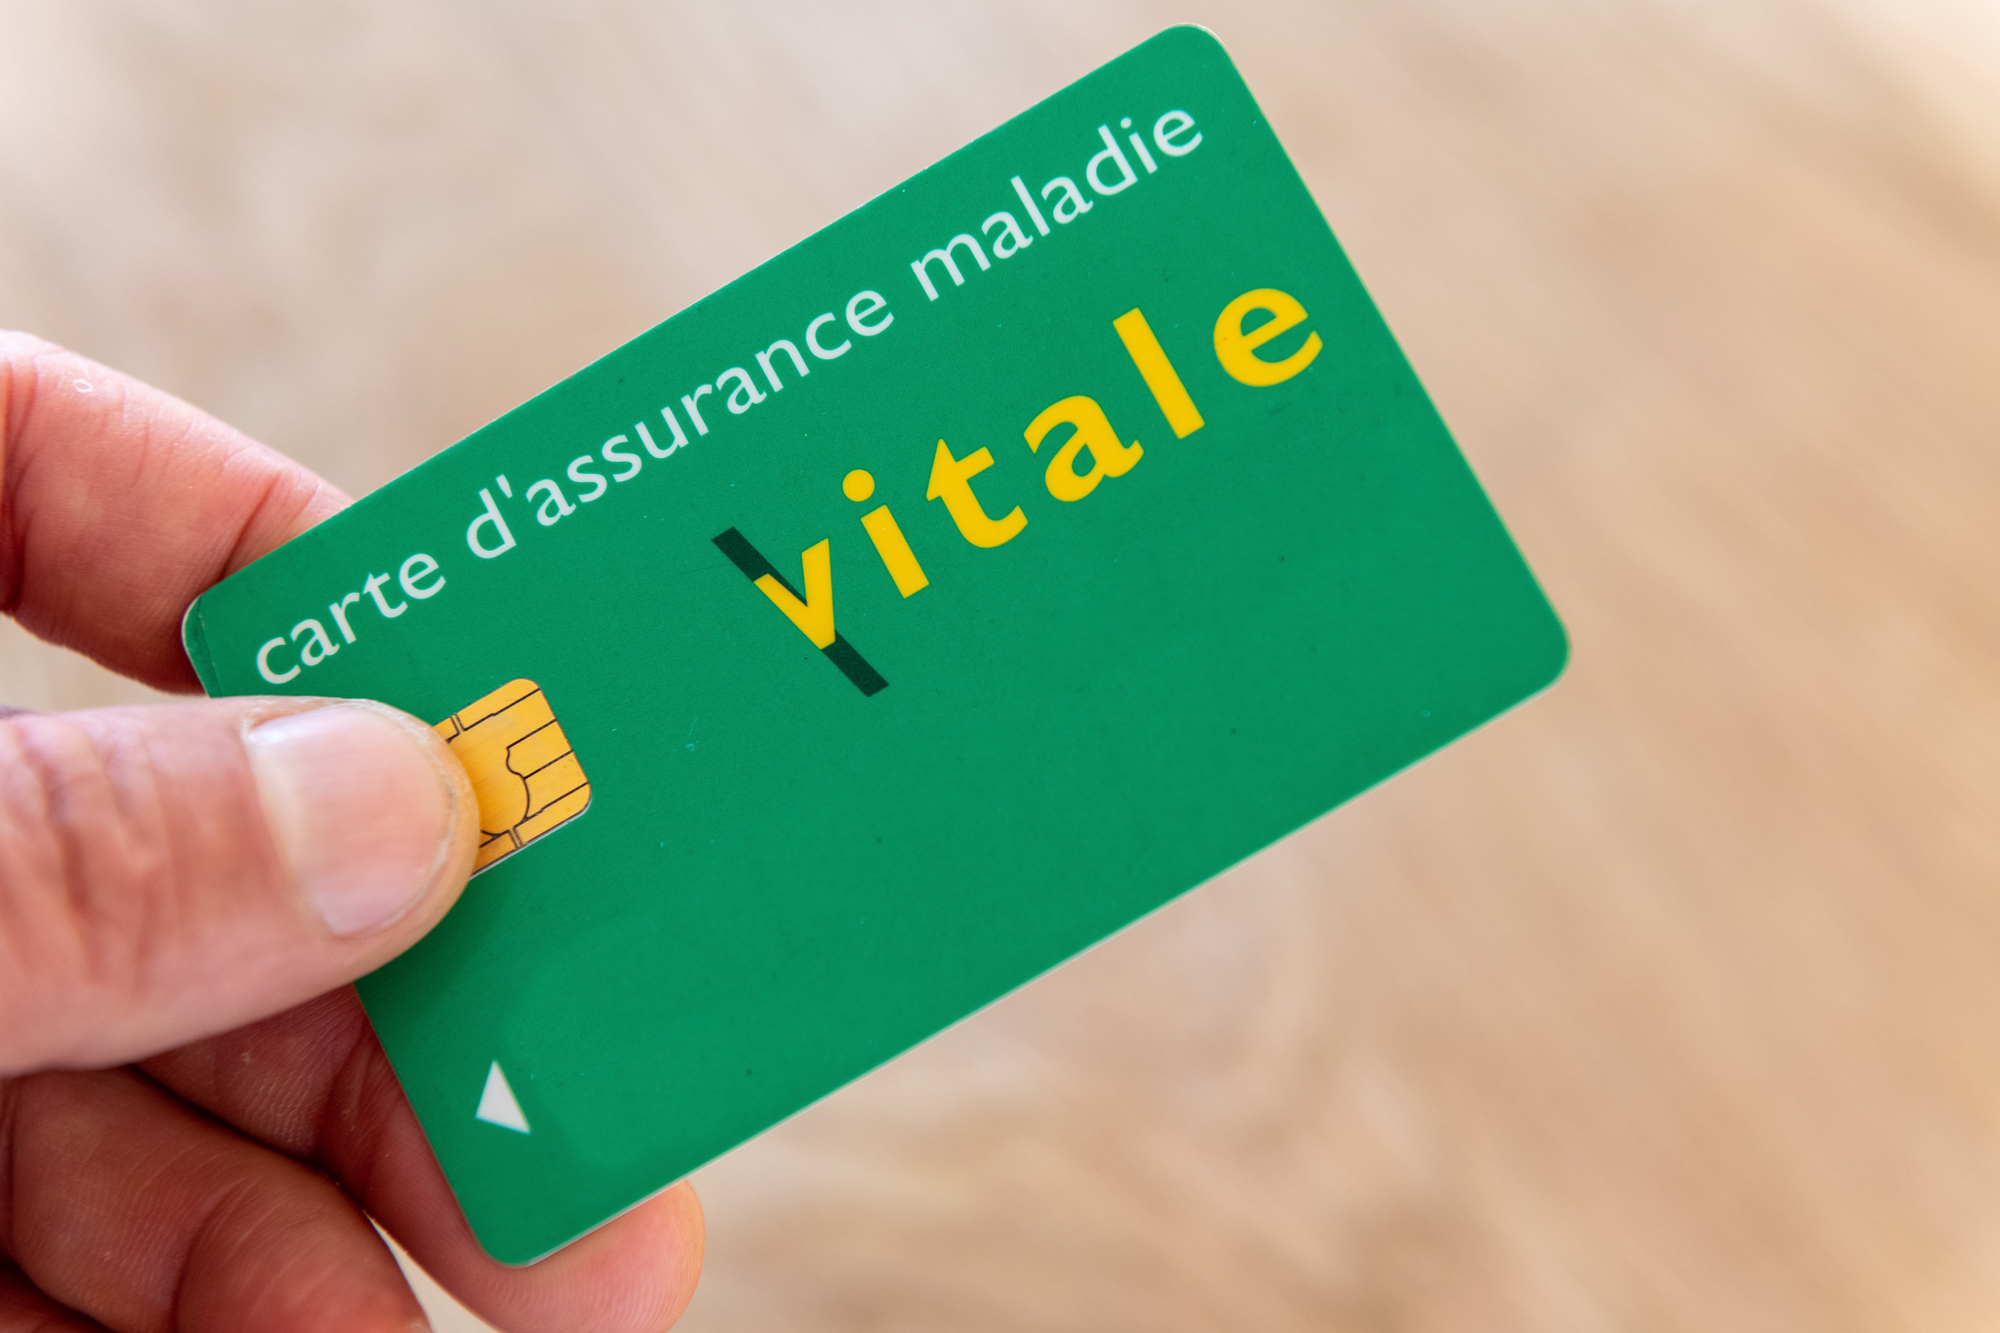 Paris, France: Vital card in the hand of an insured